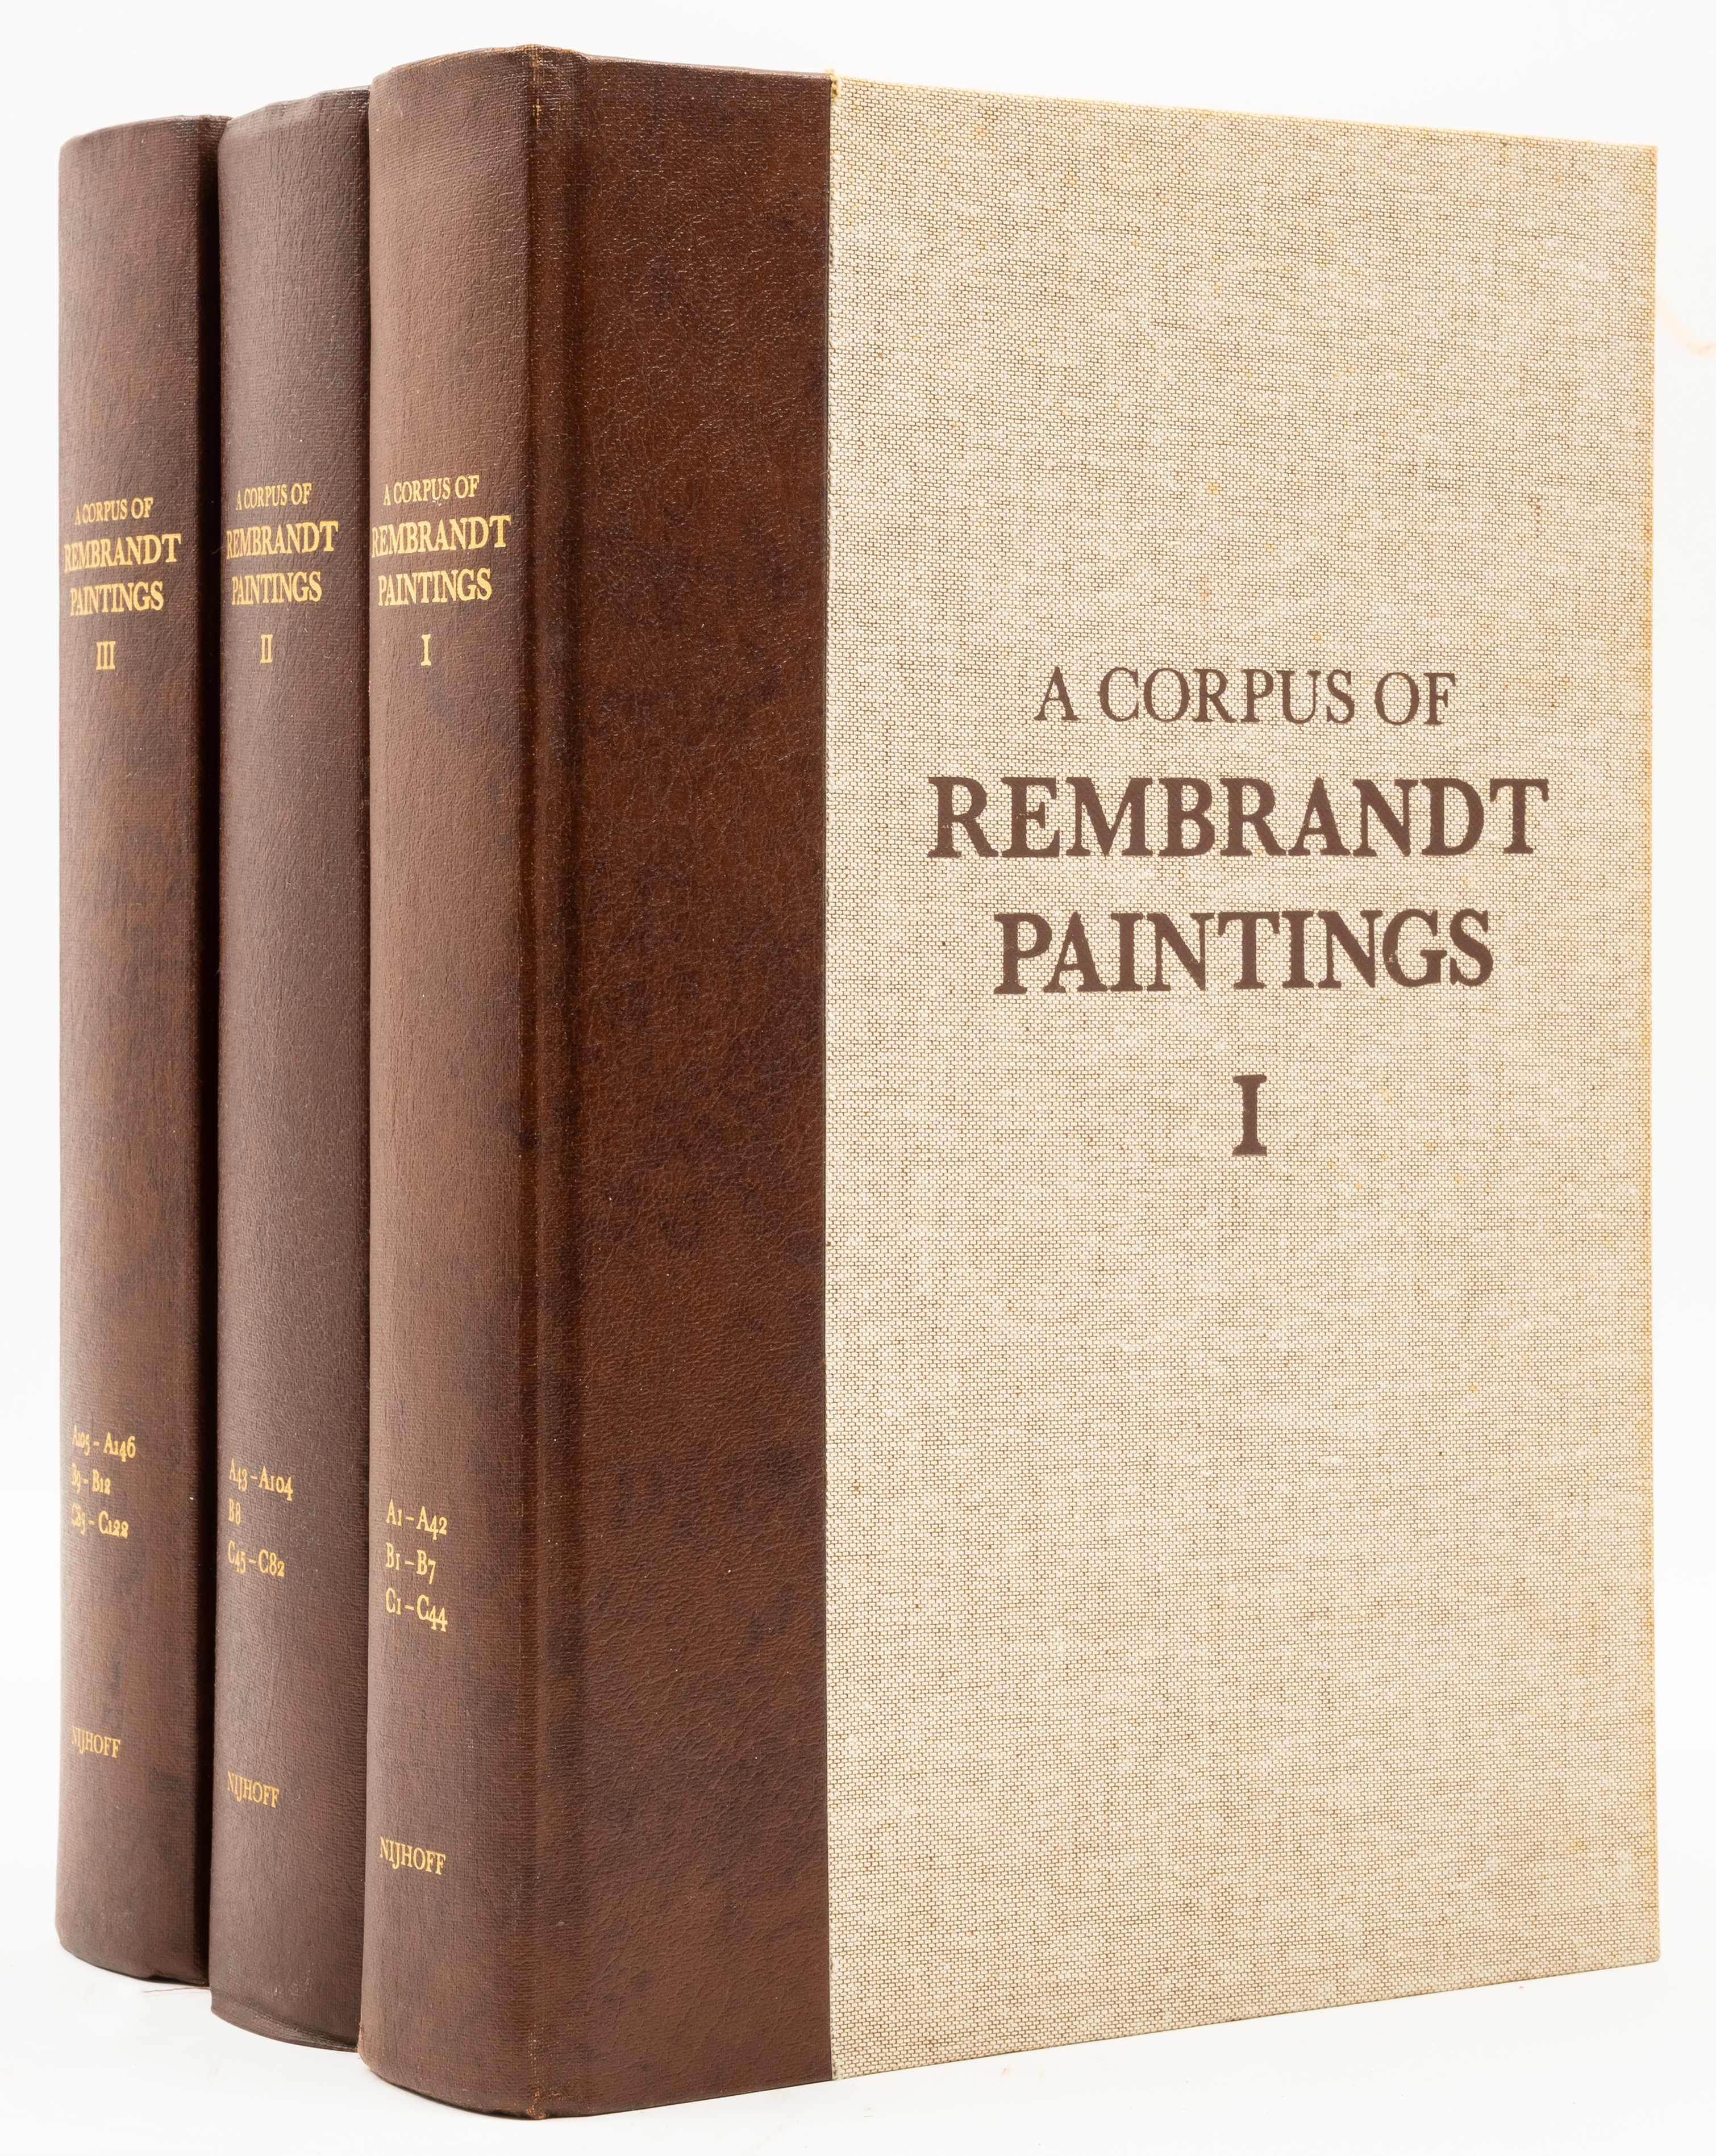 Bruyn (J.) & others. A Corpus of Rembrandt Paintings, 3 vol. only (of 6), The Hague, Martinus Nij...